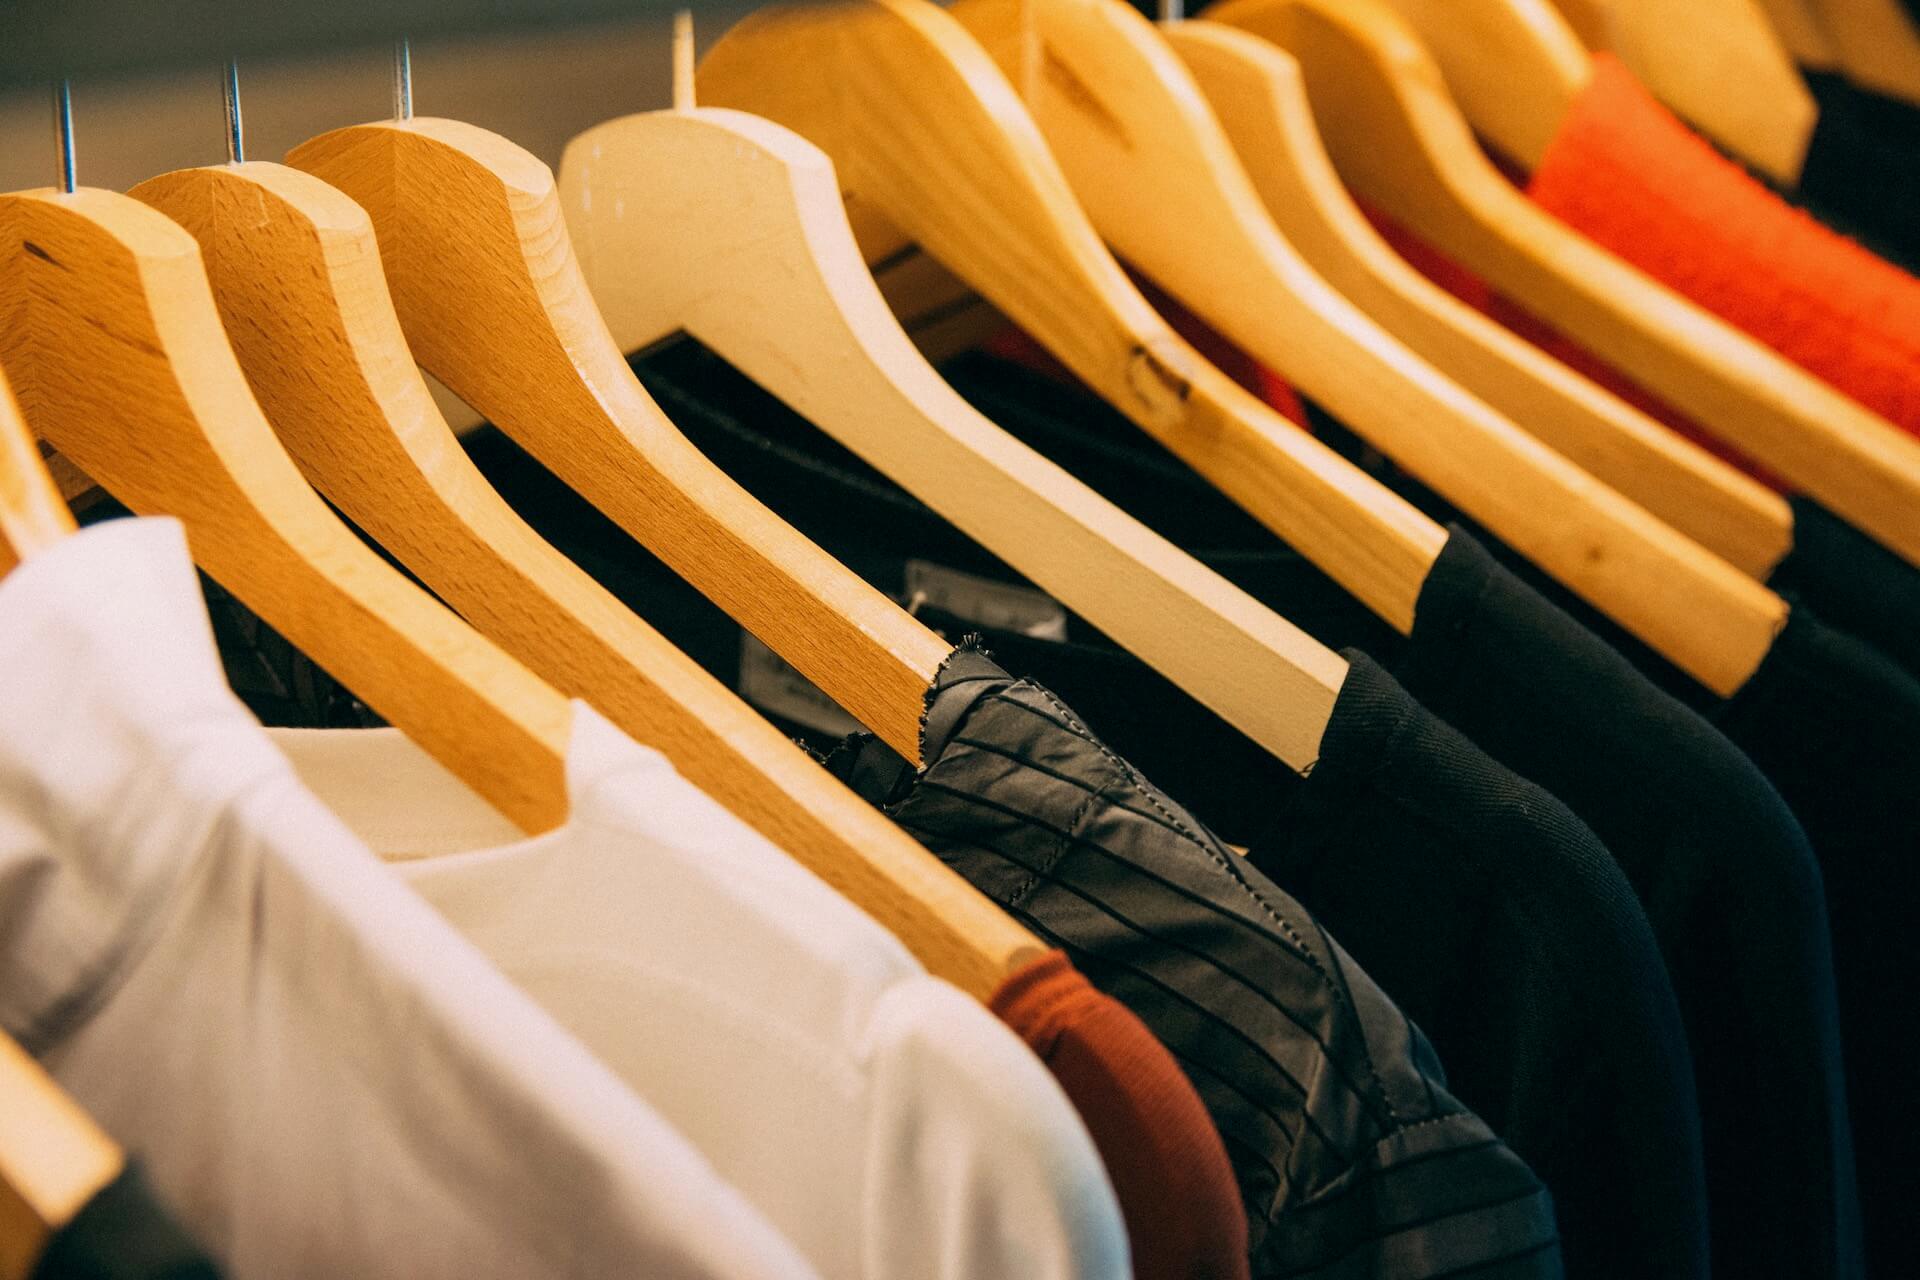 THE BEST 10 Thrift Stores in PALO ALTO, CA - Last Updated October